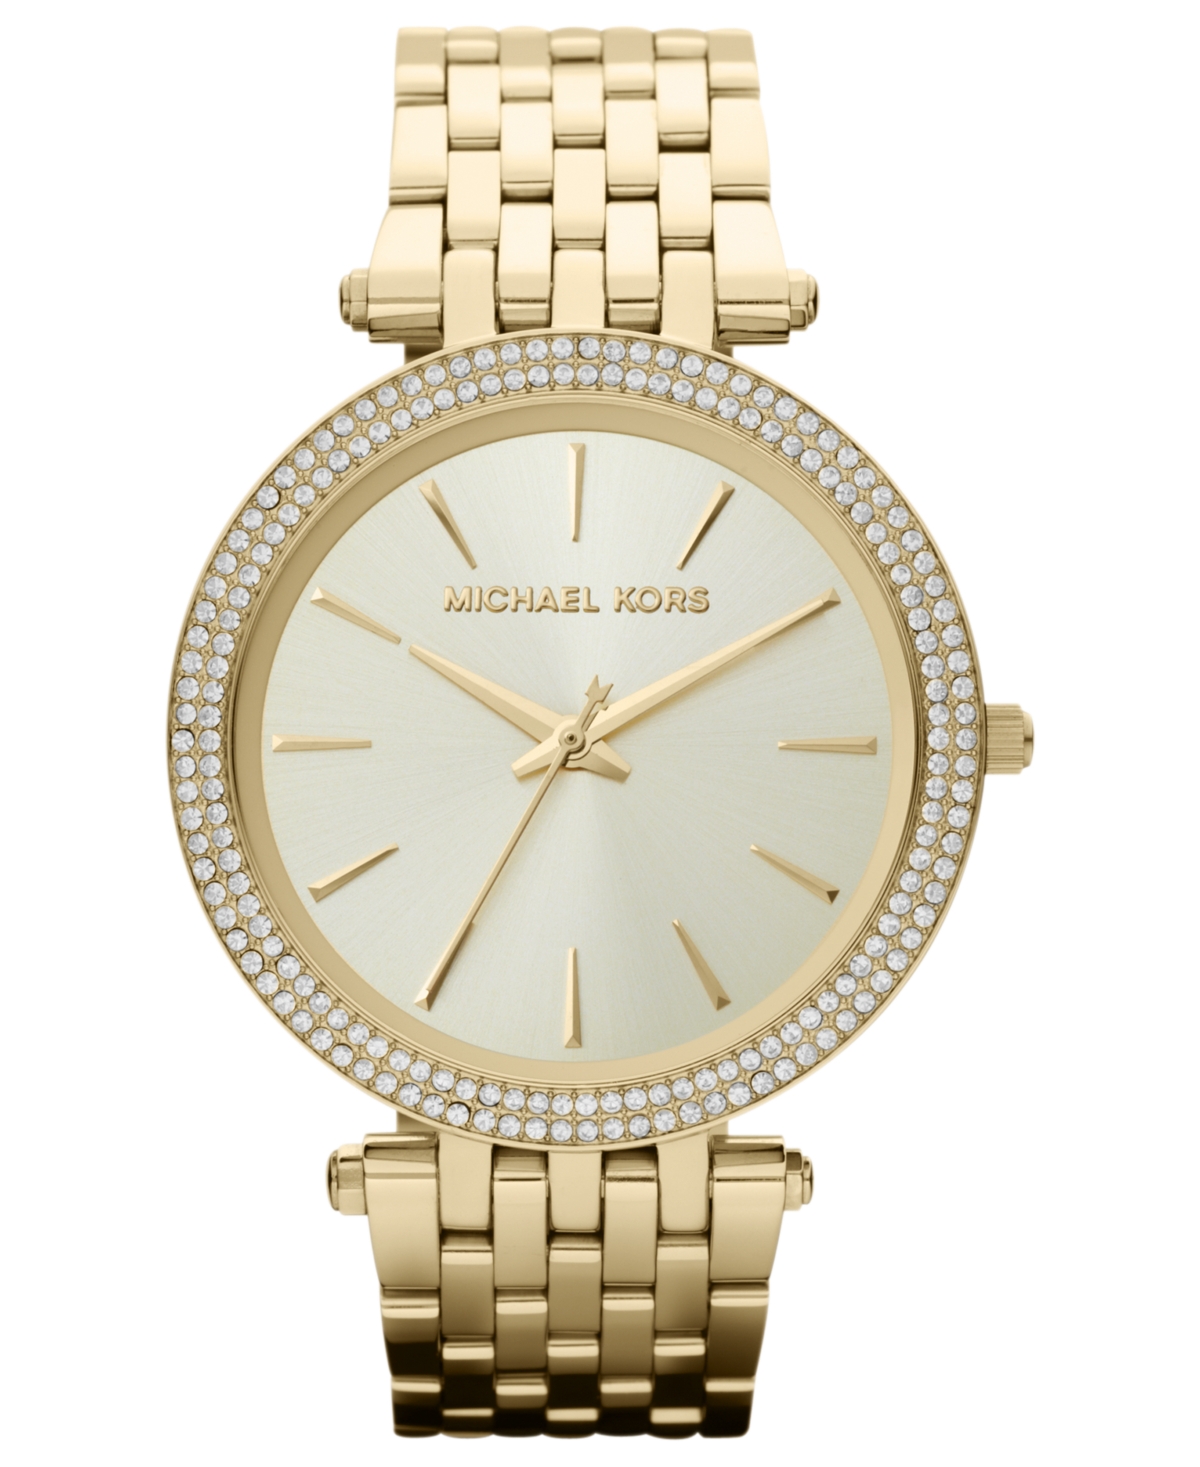 Michael Kors Women's Darci Gold-Tone Stainless Steel Bracelet Watch 39mm  MK3191 & Reviews - All Watches - Jewelry & Watches - Macy's